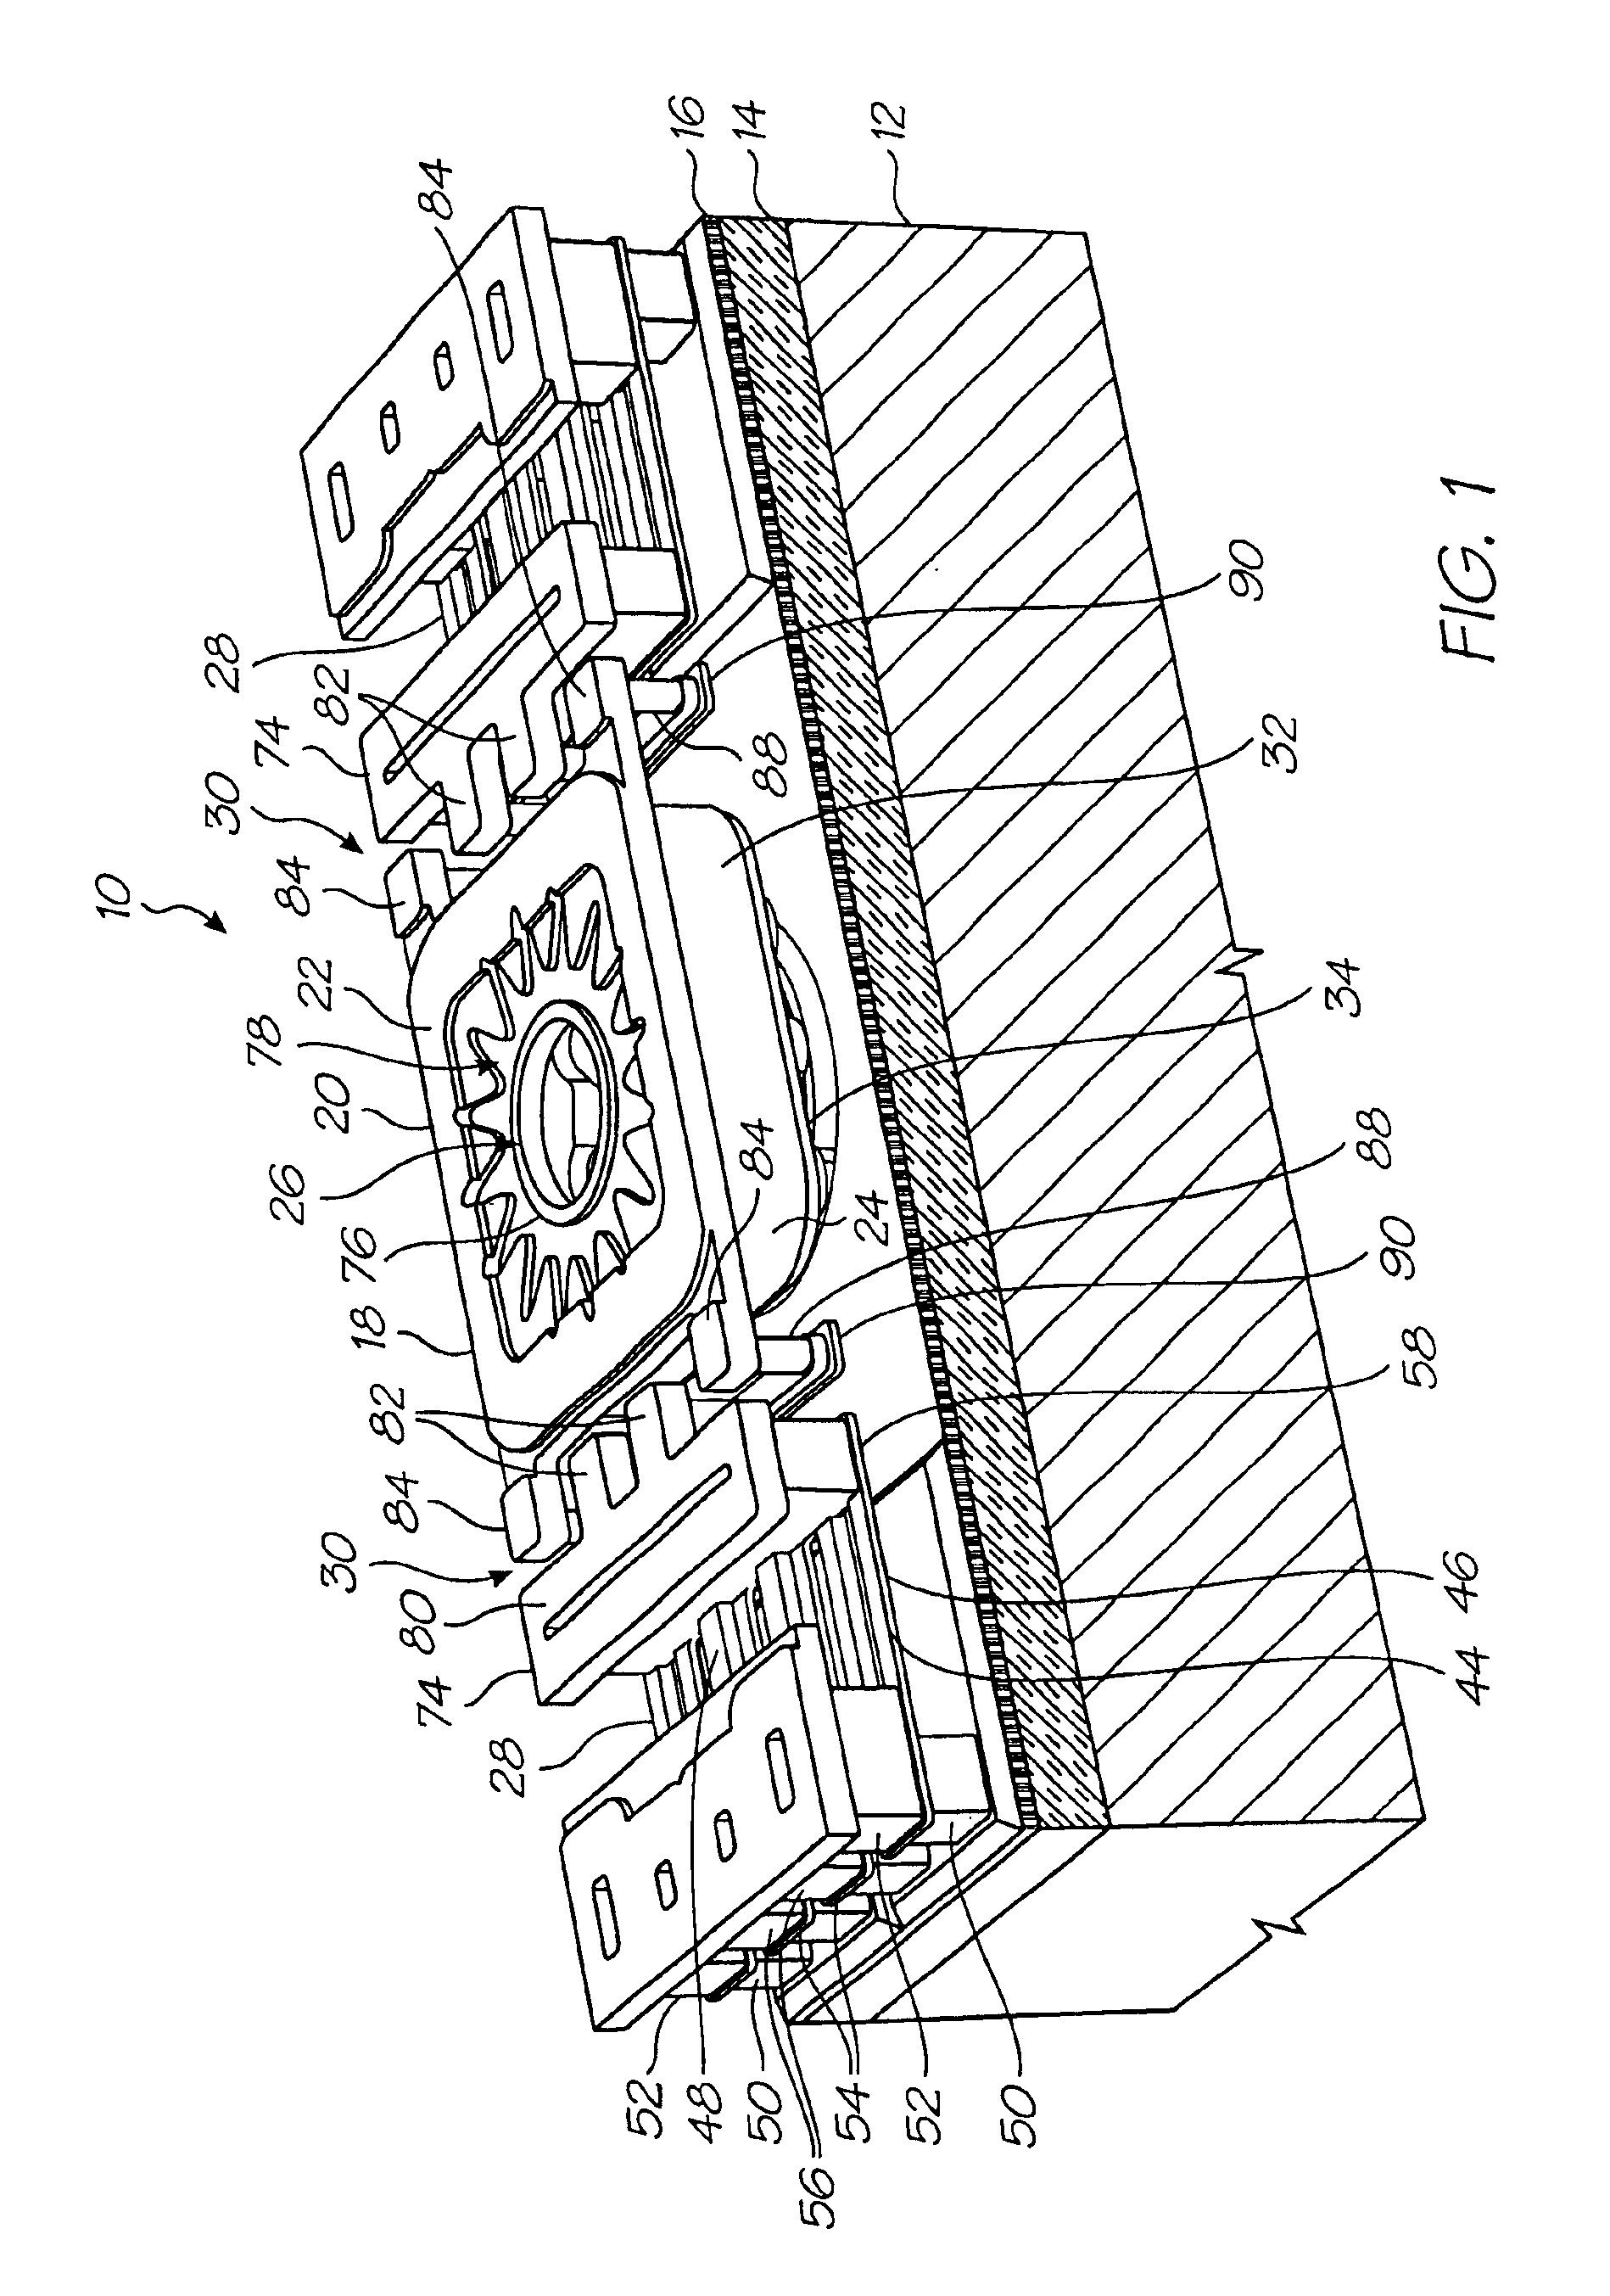 Pagewidth printhead chip having symmetrically actuated fluid ejection components